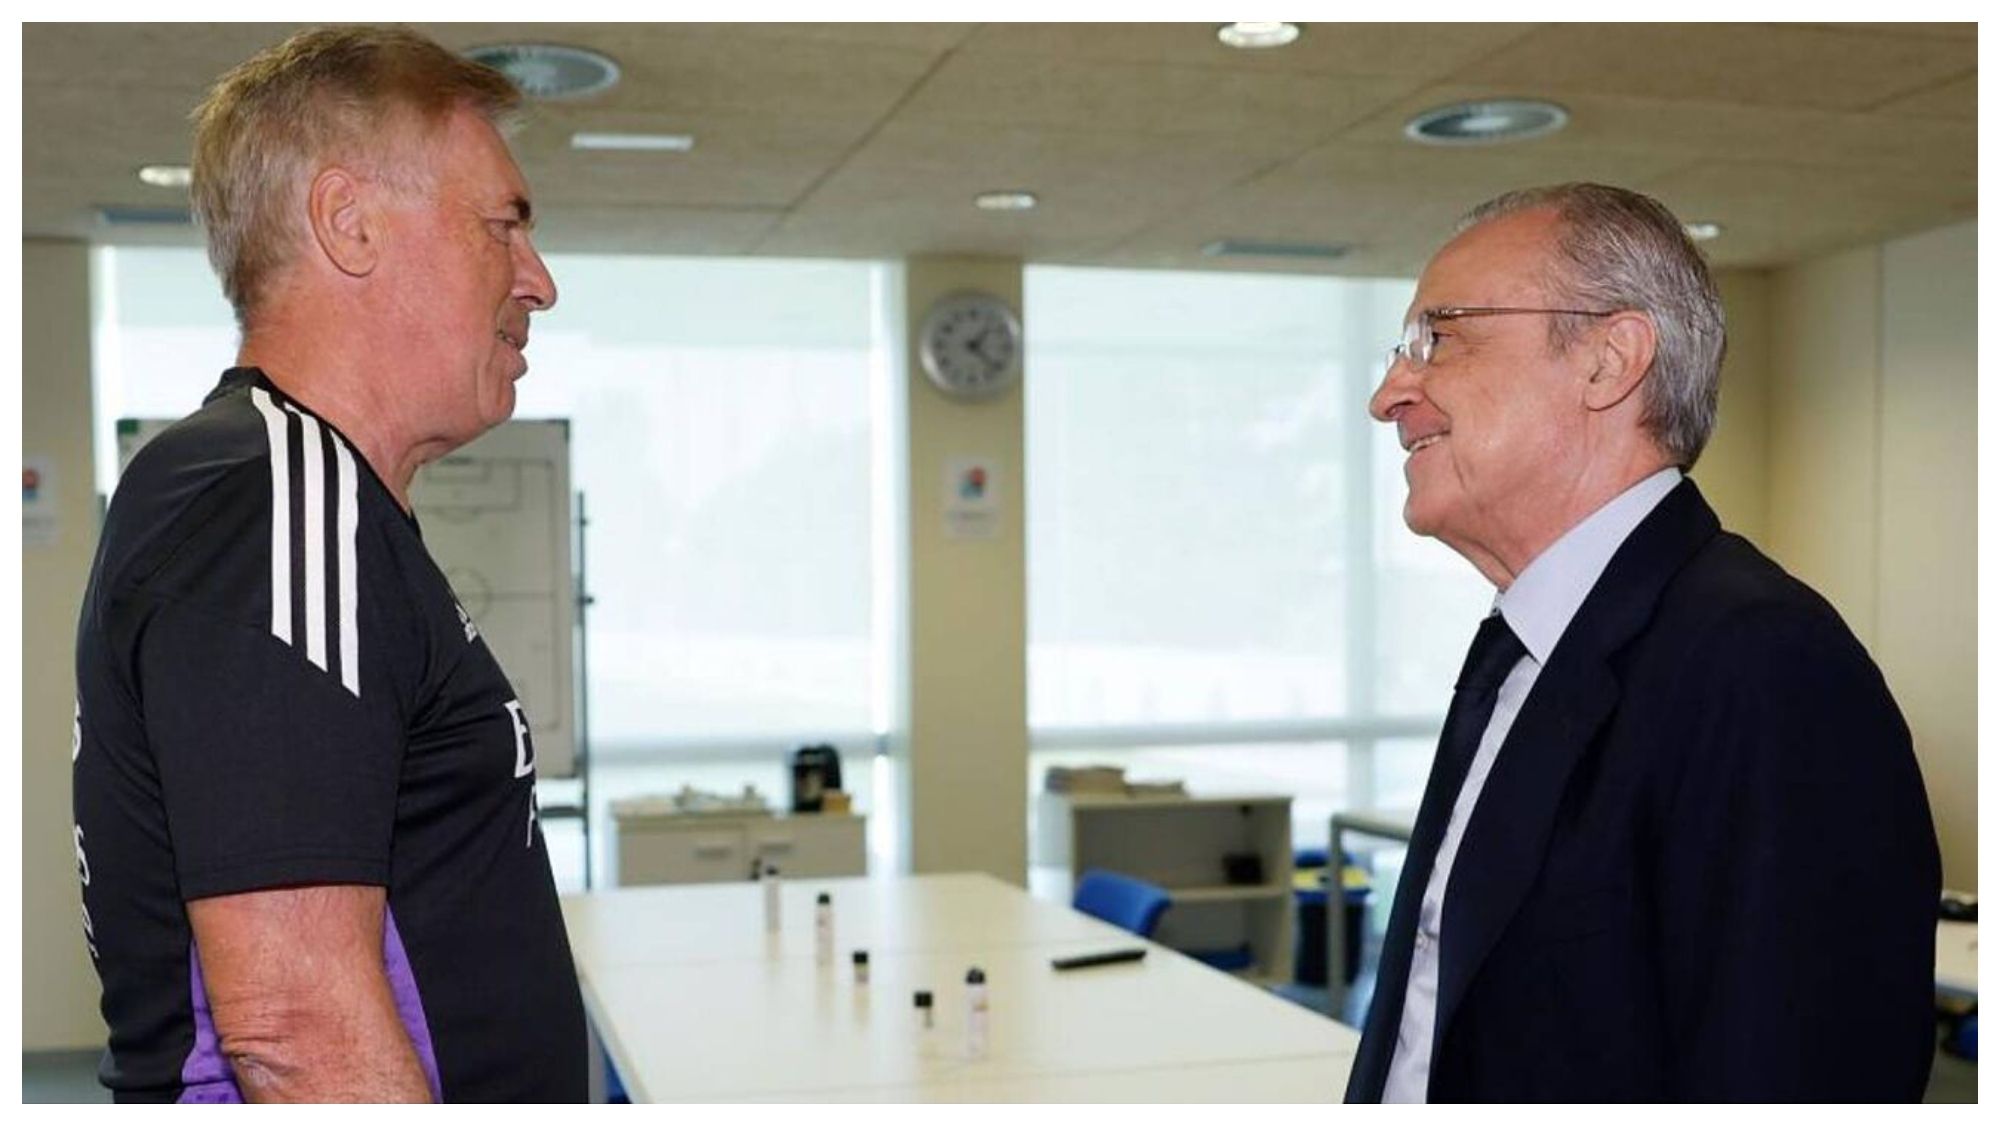 Real Madrid President Florentino Perez meets with Carlo Ancelotti to discuss defeats